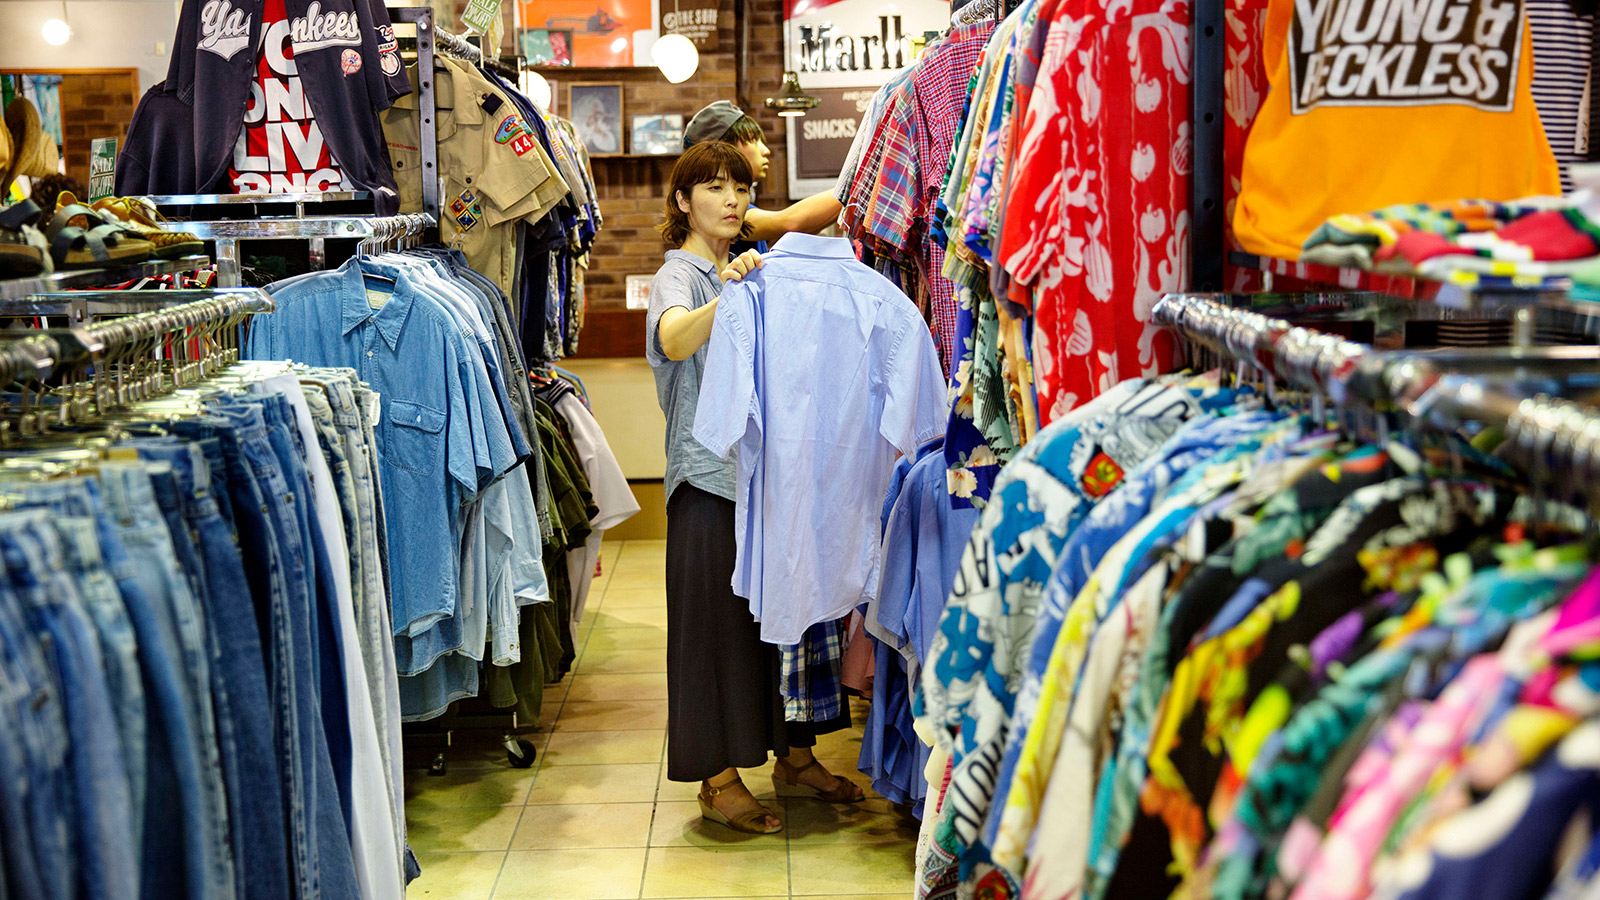 A women looks at second hand clothing at a second hand shop in Tokyo, Japan.